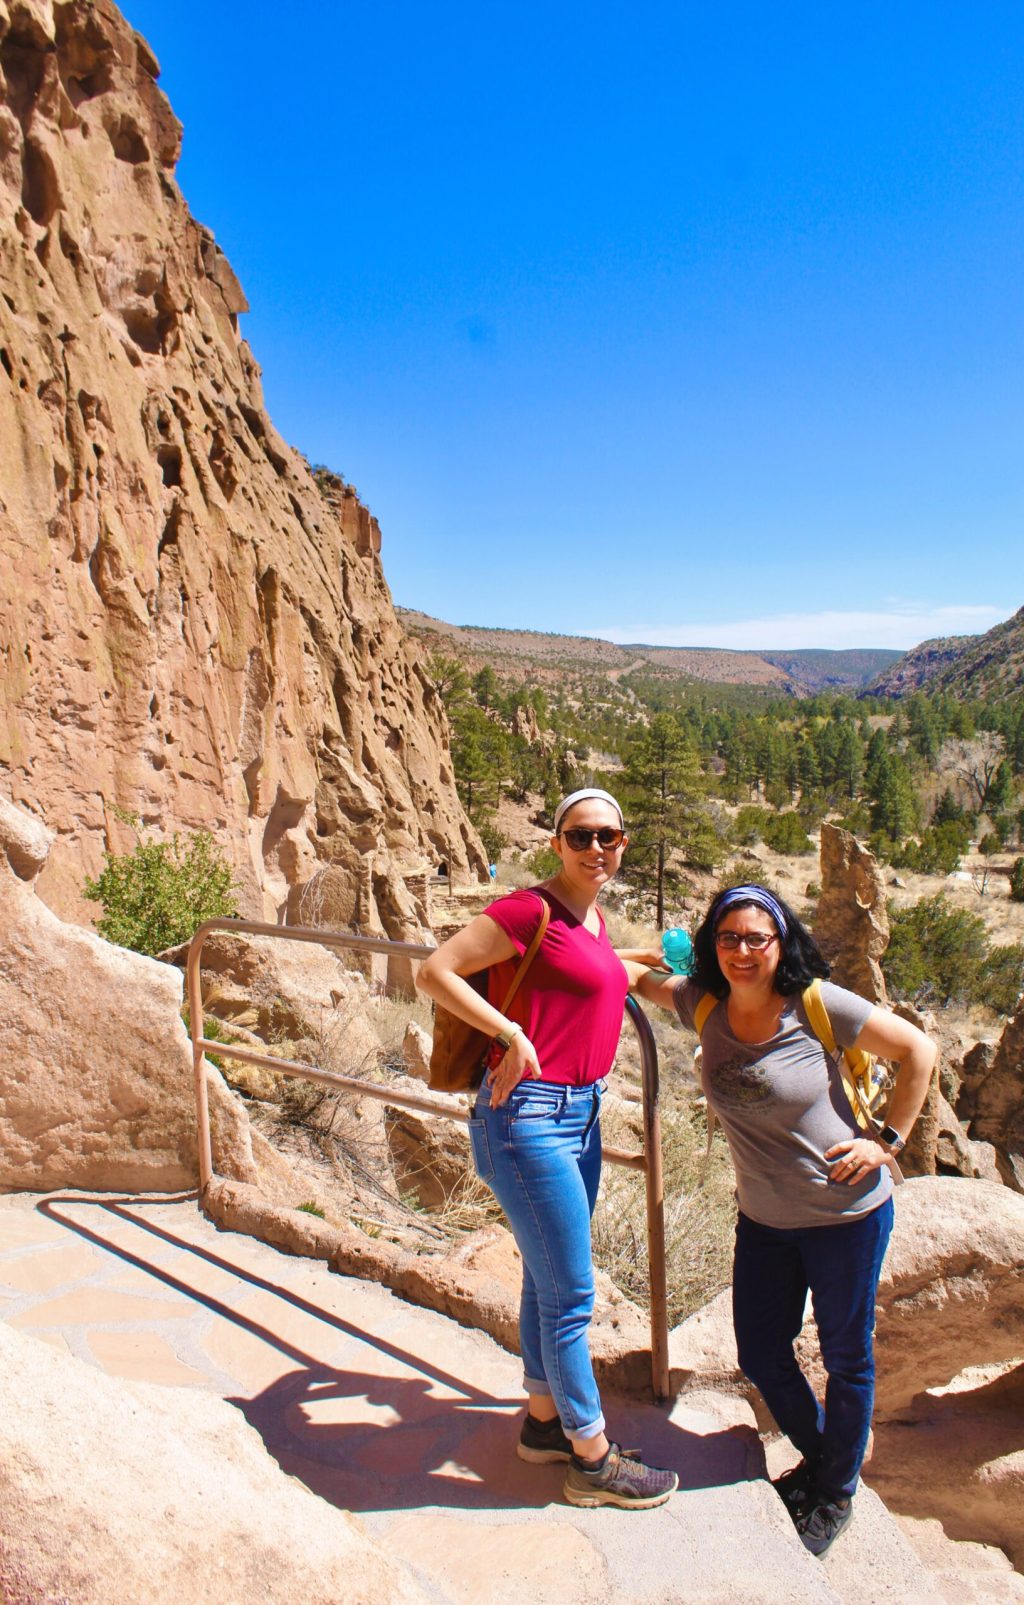 Katia D'Arcy and Leslie D'Arcy on the Main Pueblo Loop Trail